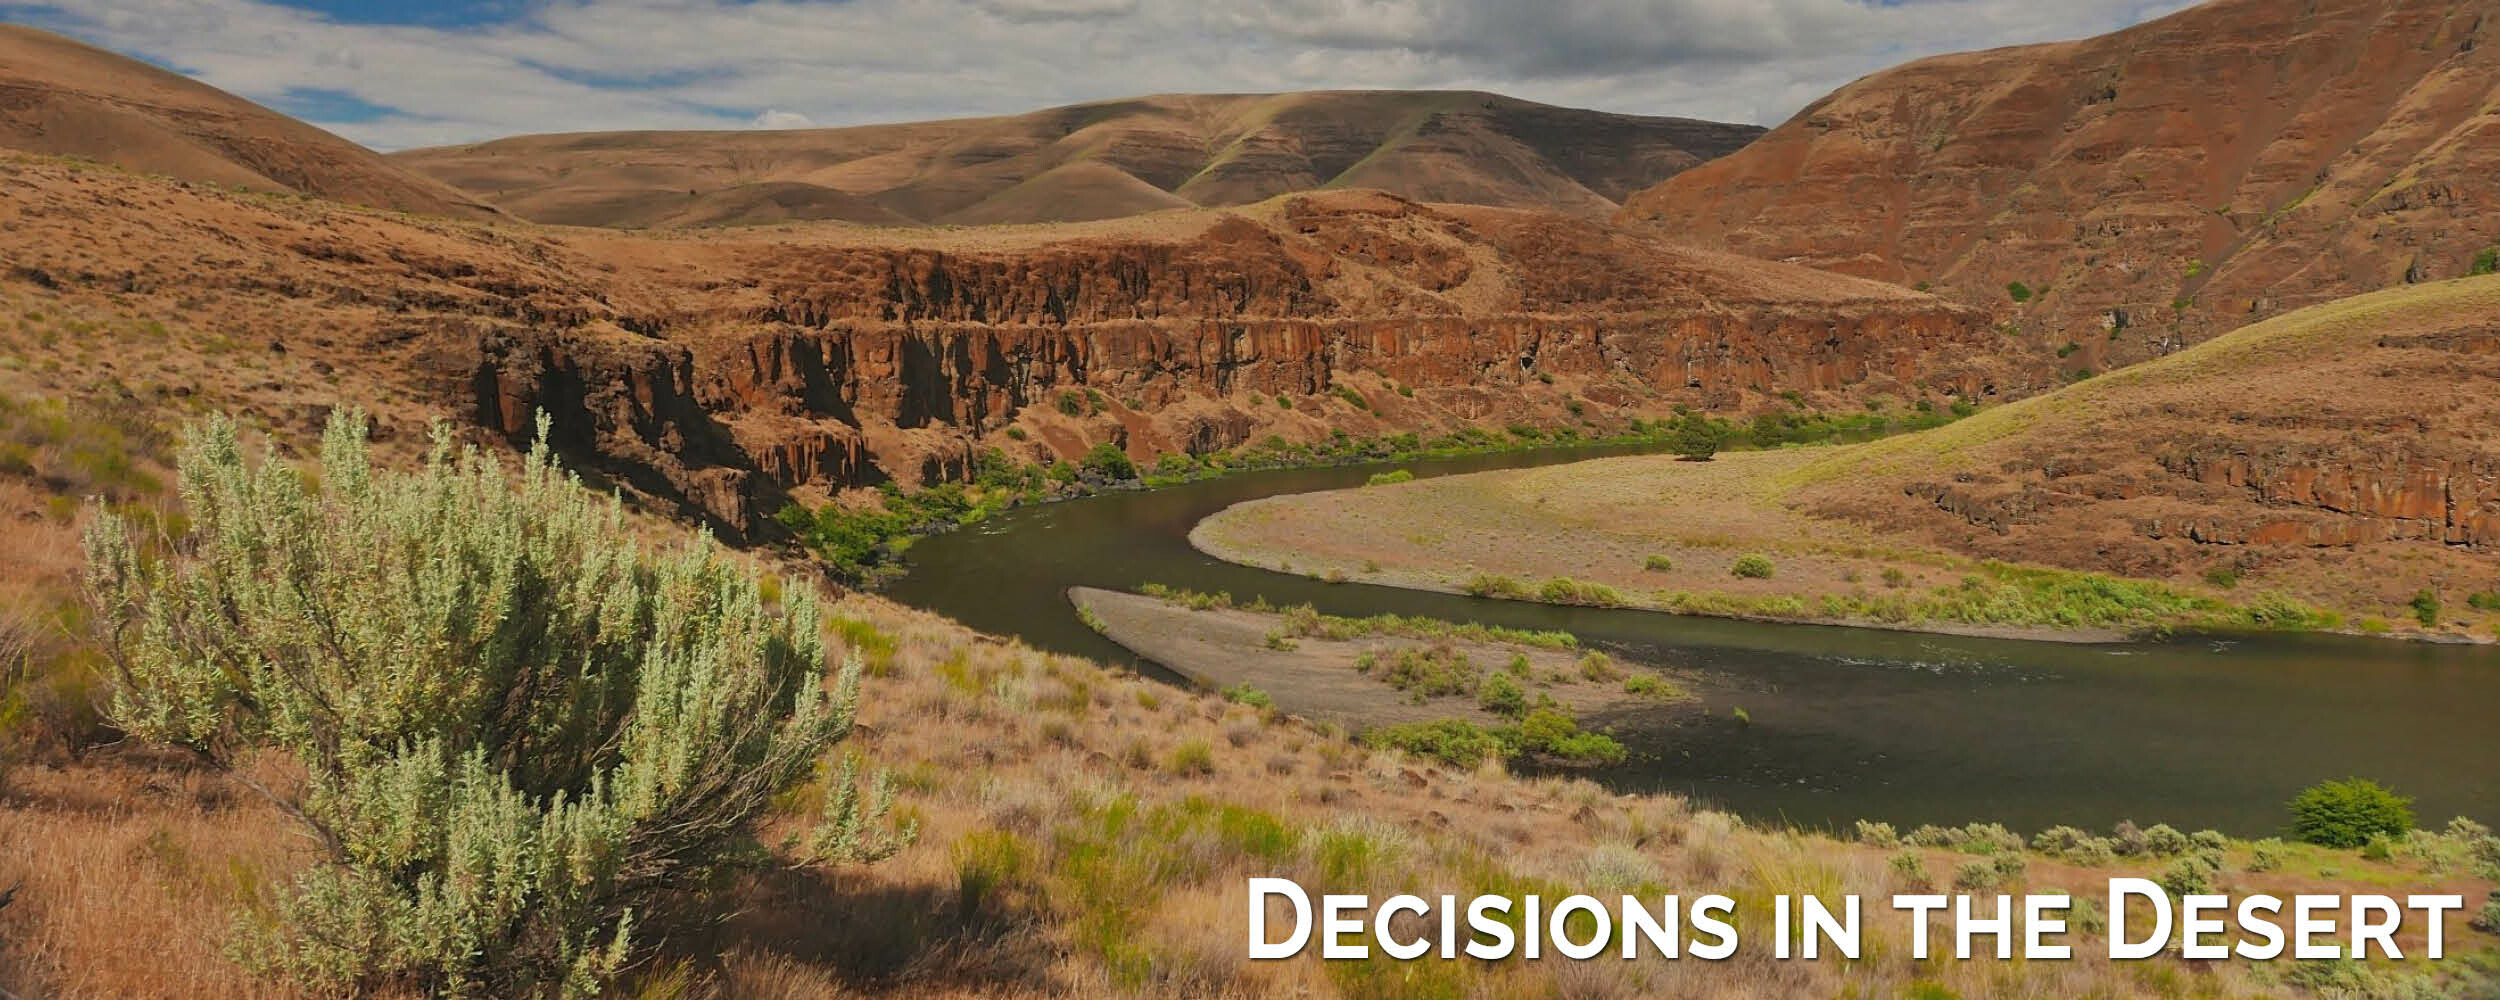 Decisions in the Desert